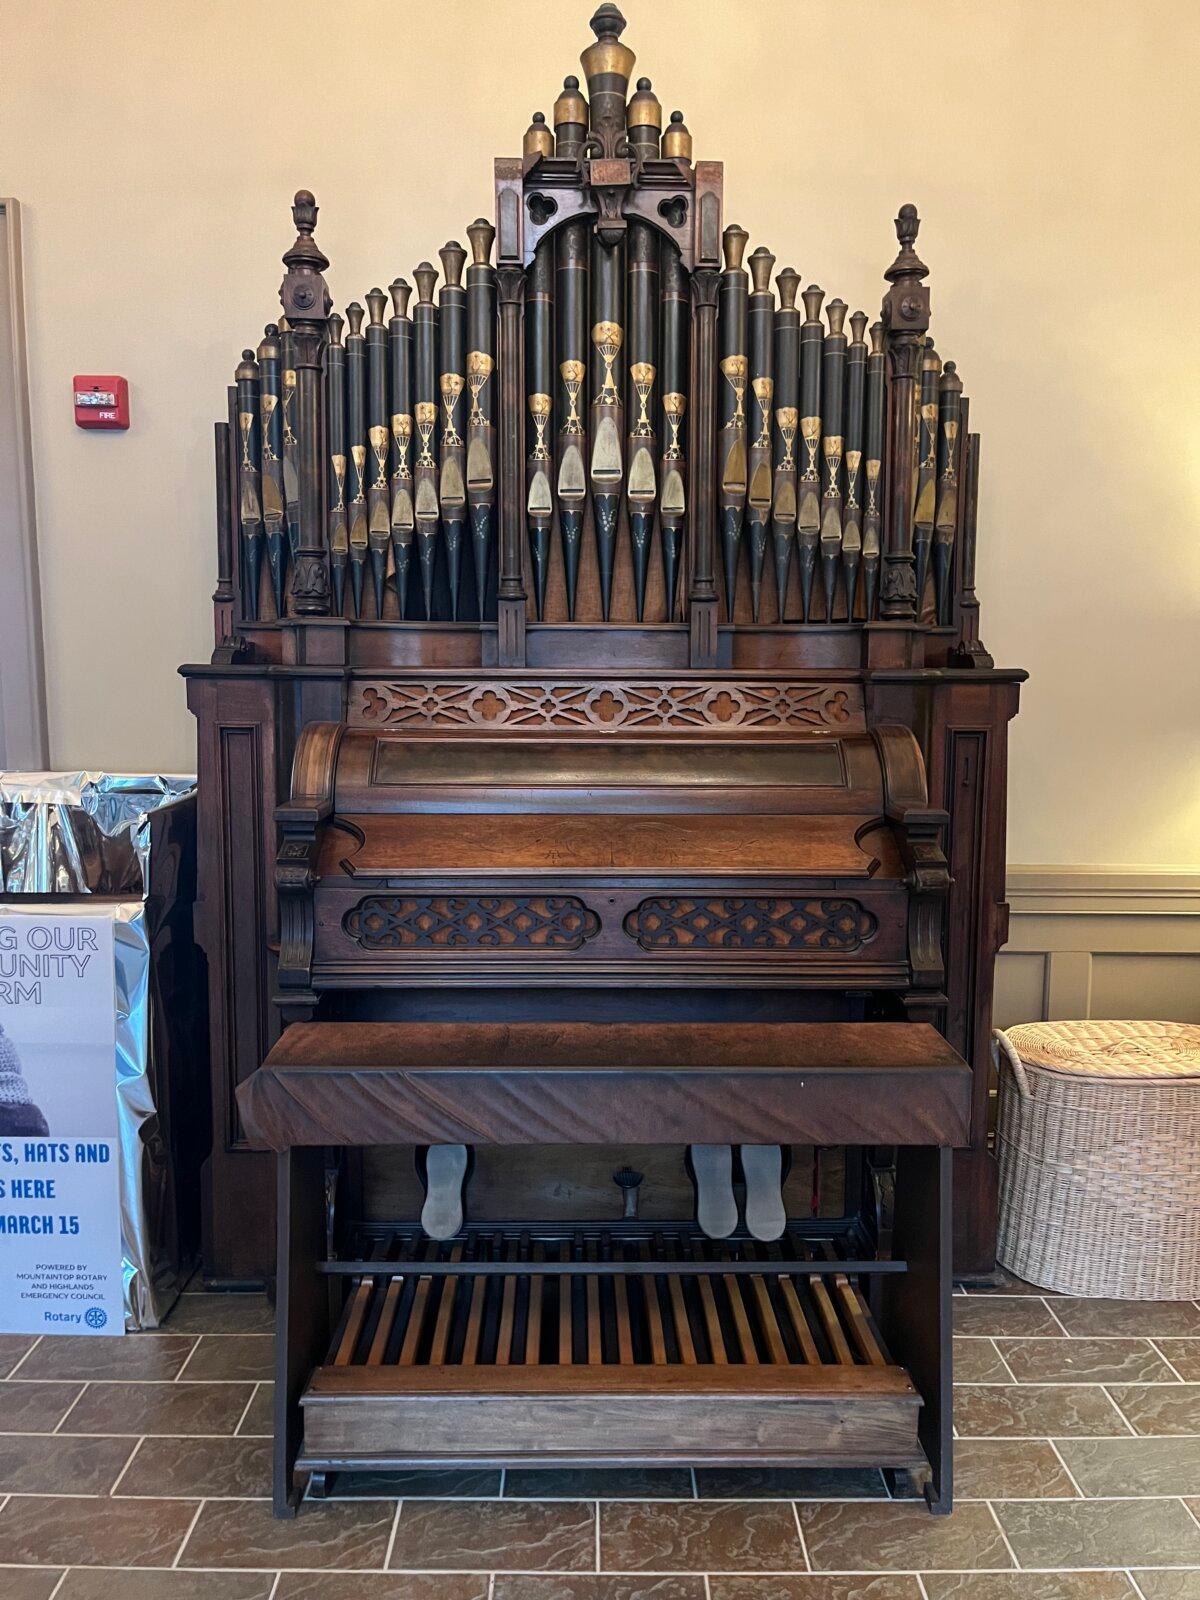 The 100 year-old reed organ that was once played at the church. (Courtesy of Deena Bouknight)